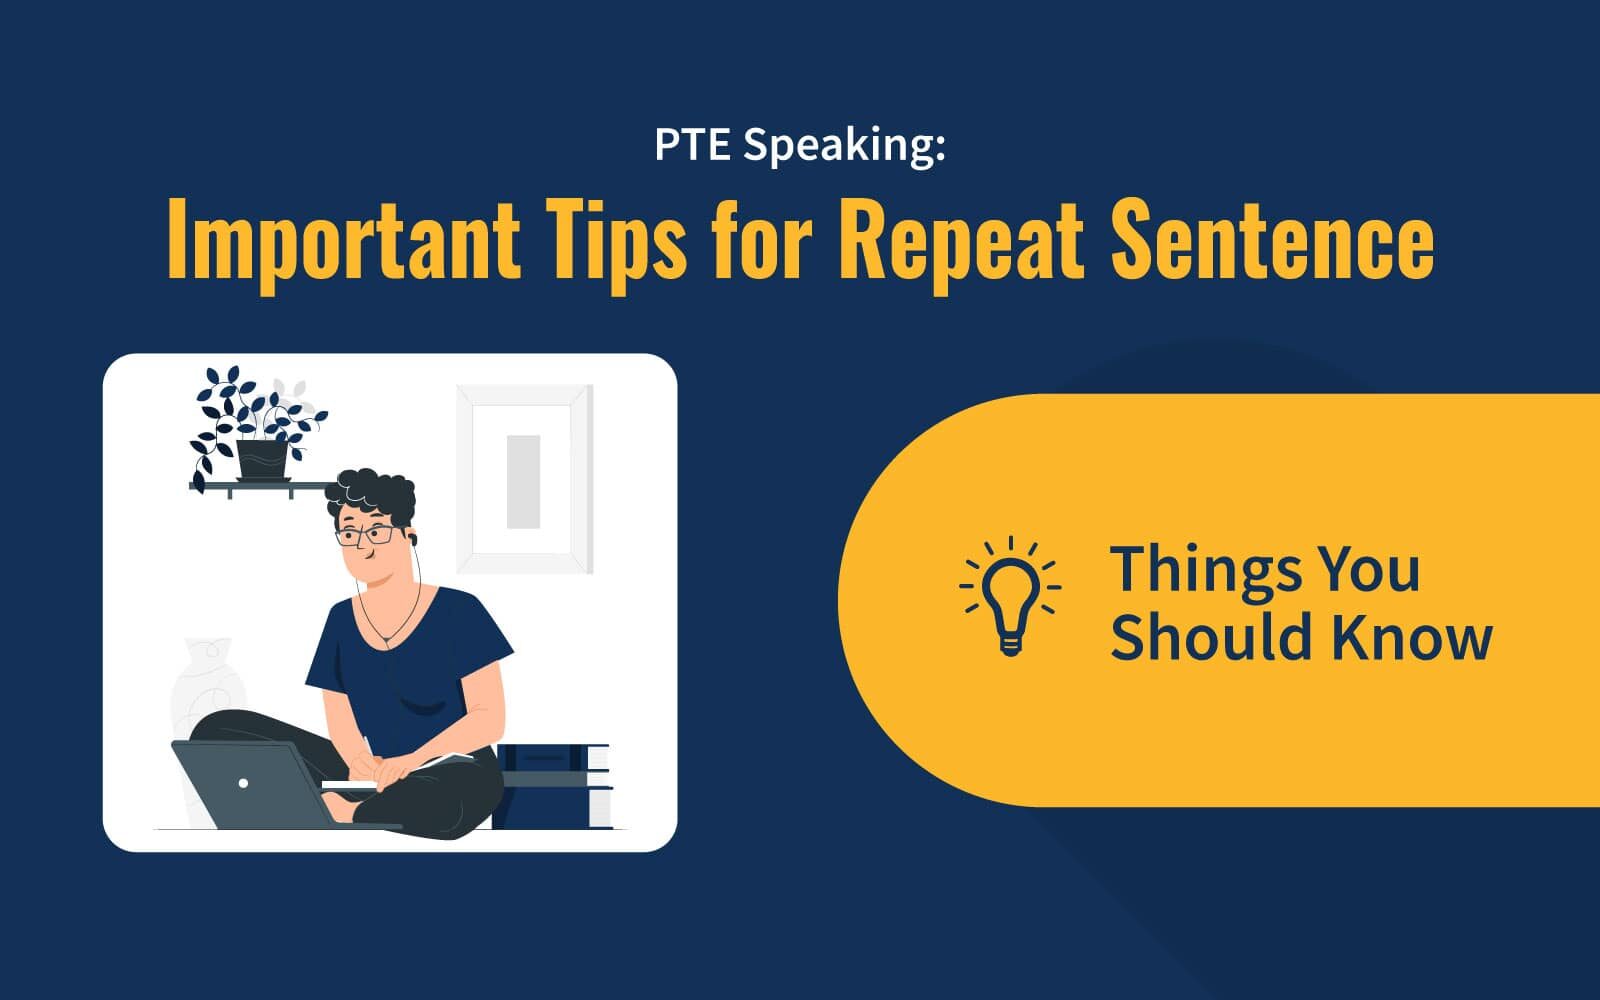 PTE Speaking: Important Tips for Repeat Sentence